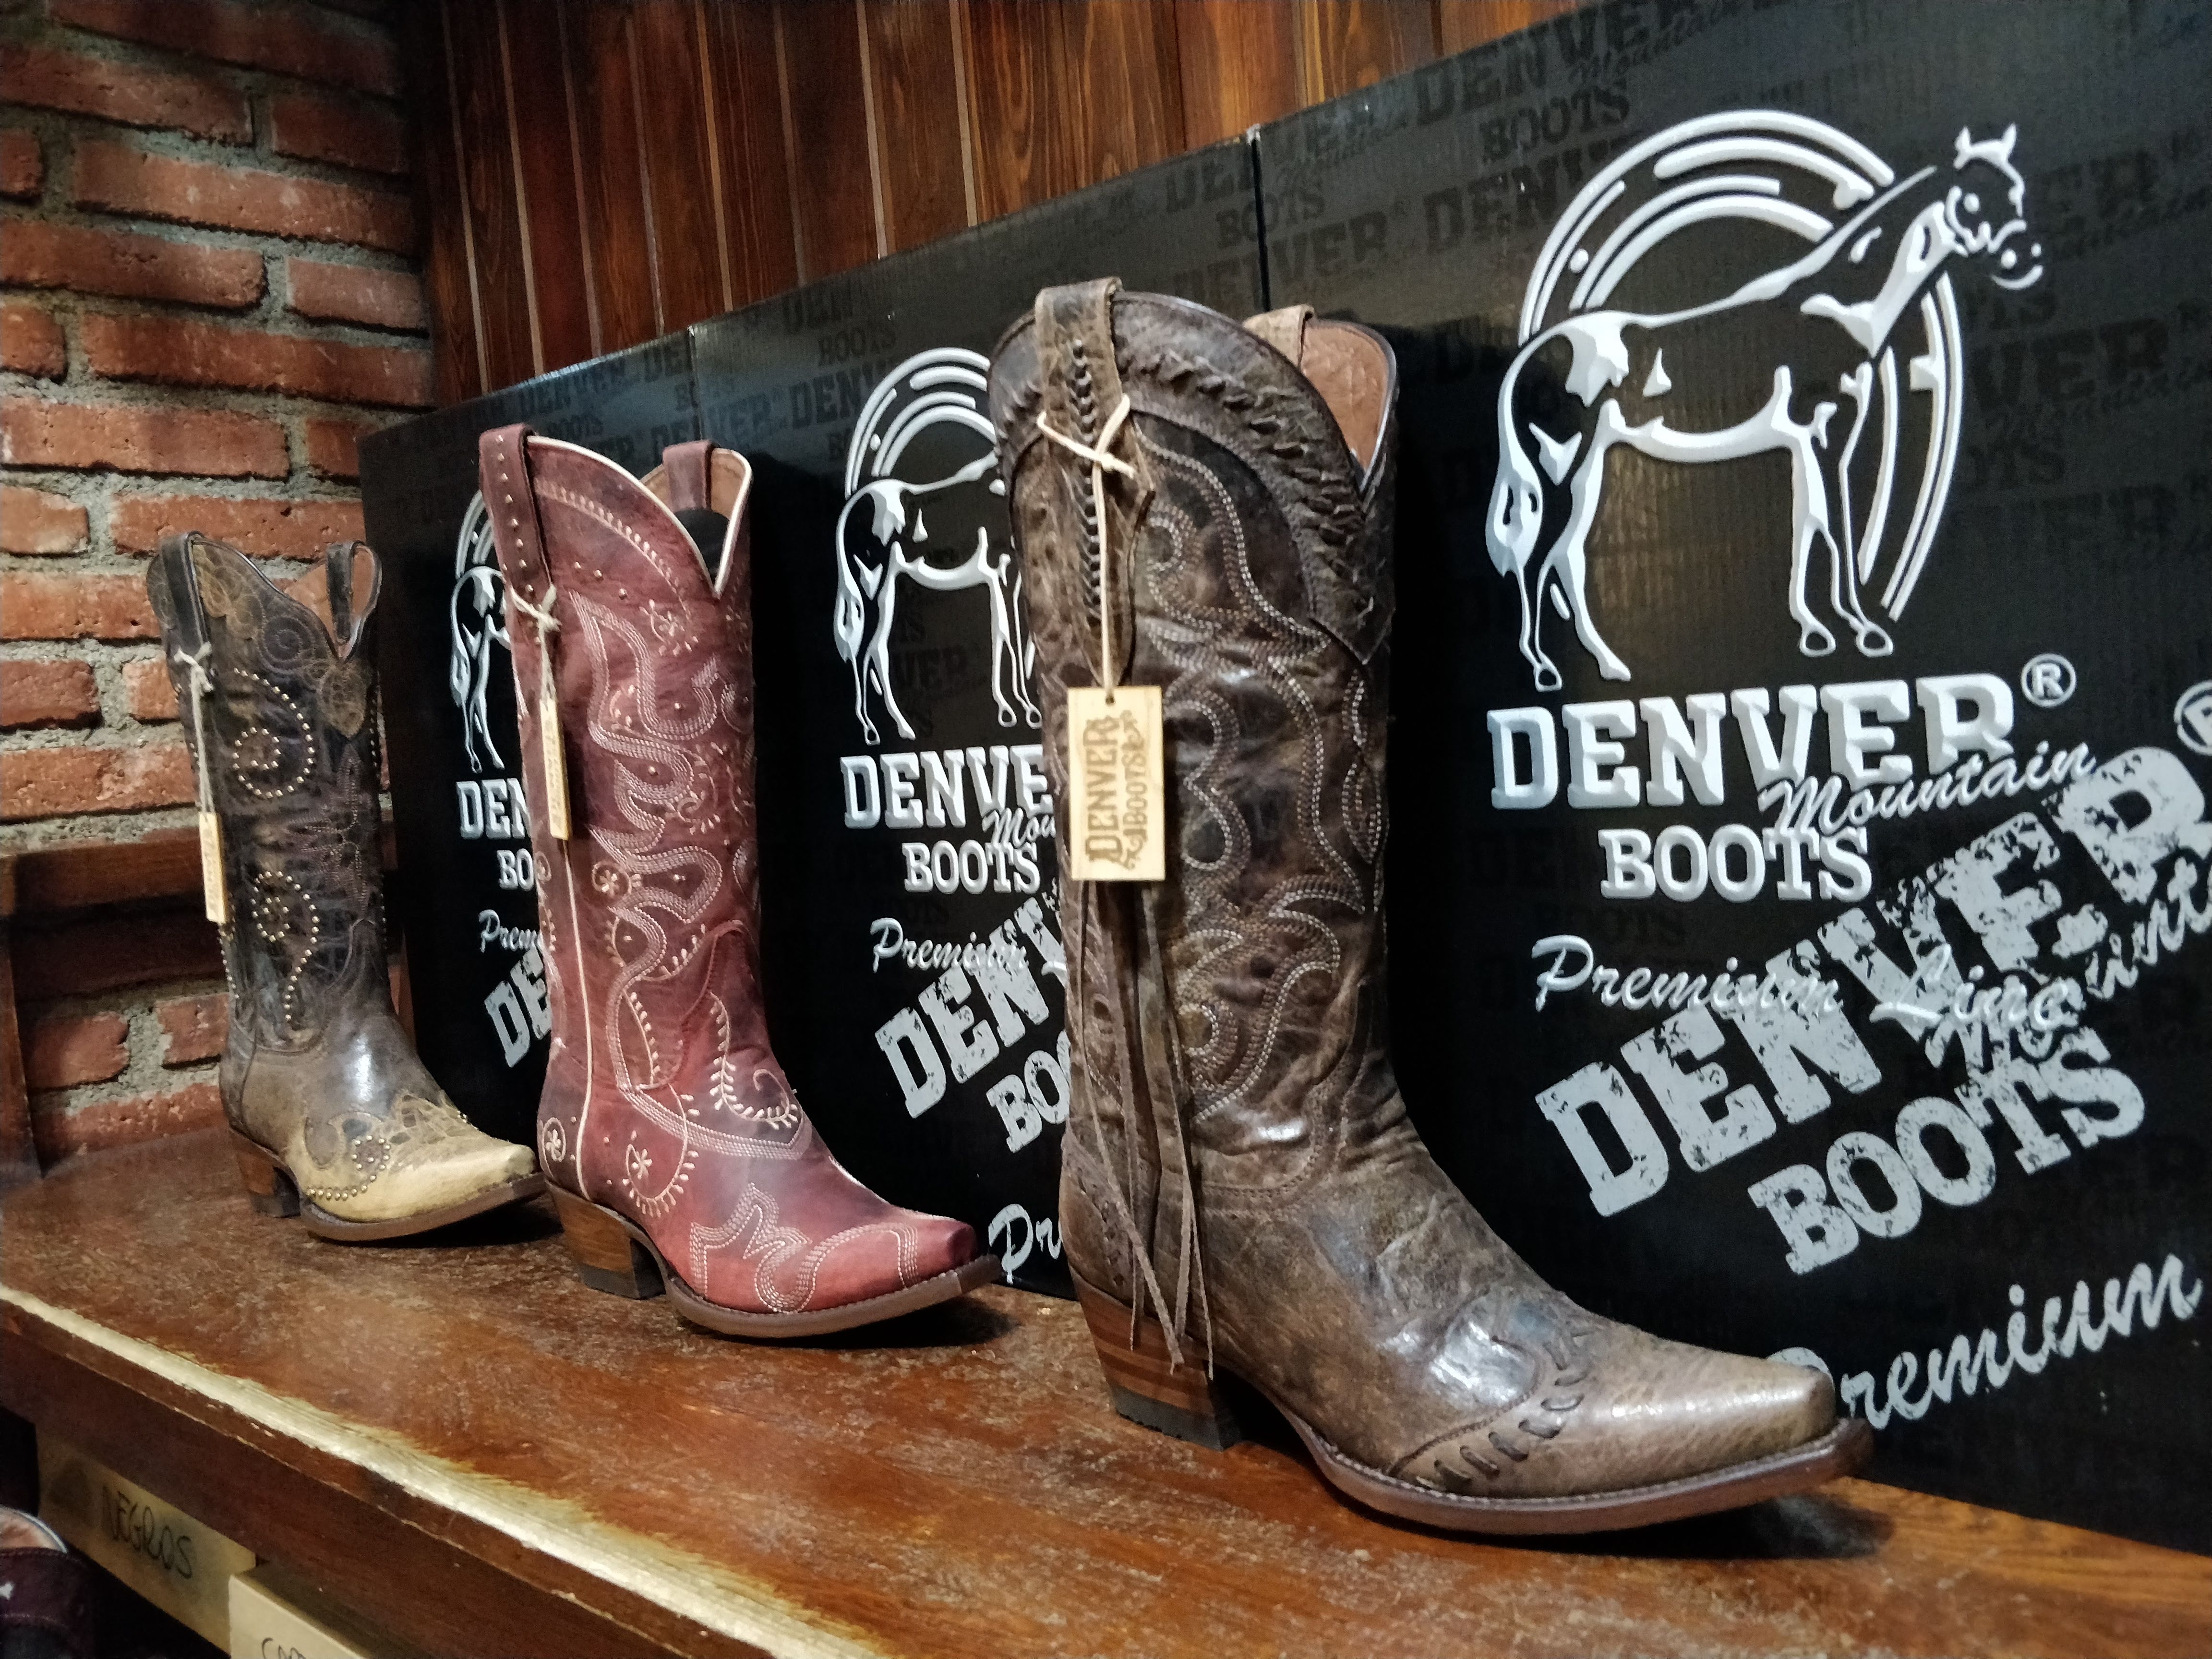 mexican cowboy boots for sale